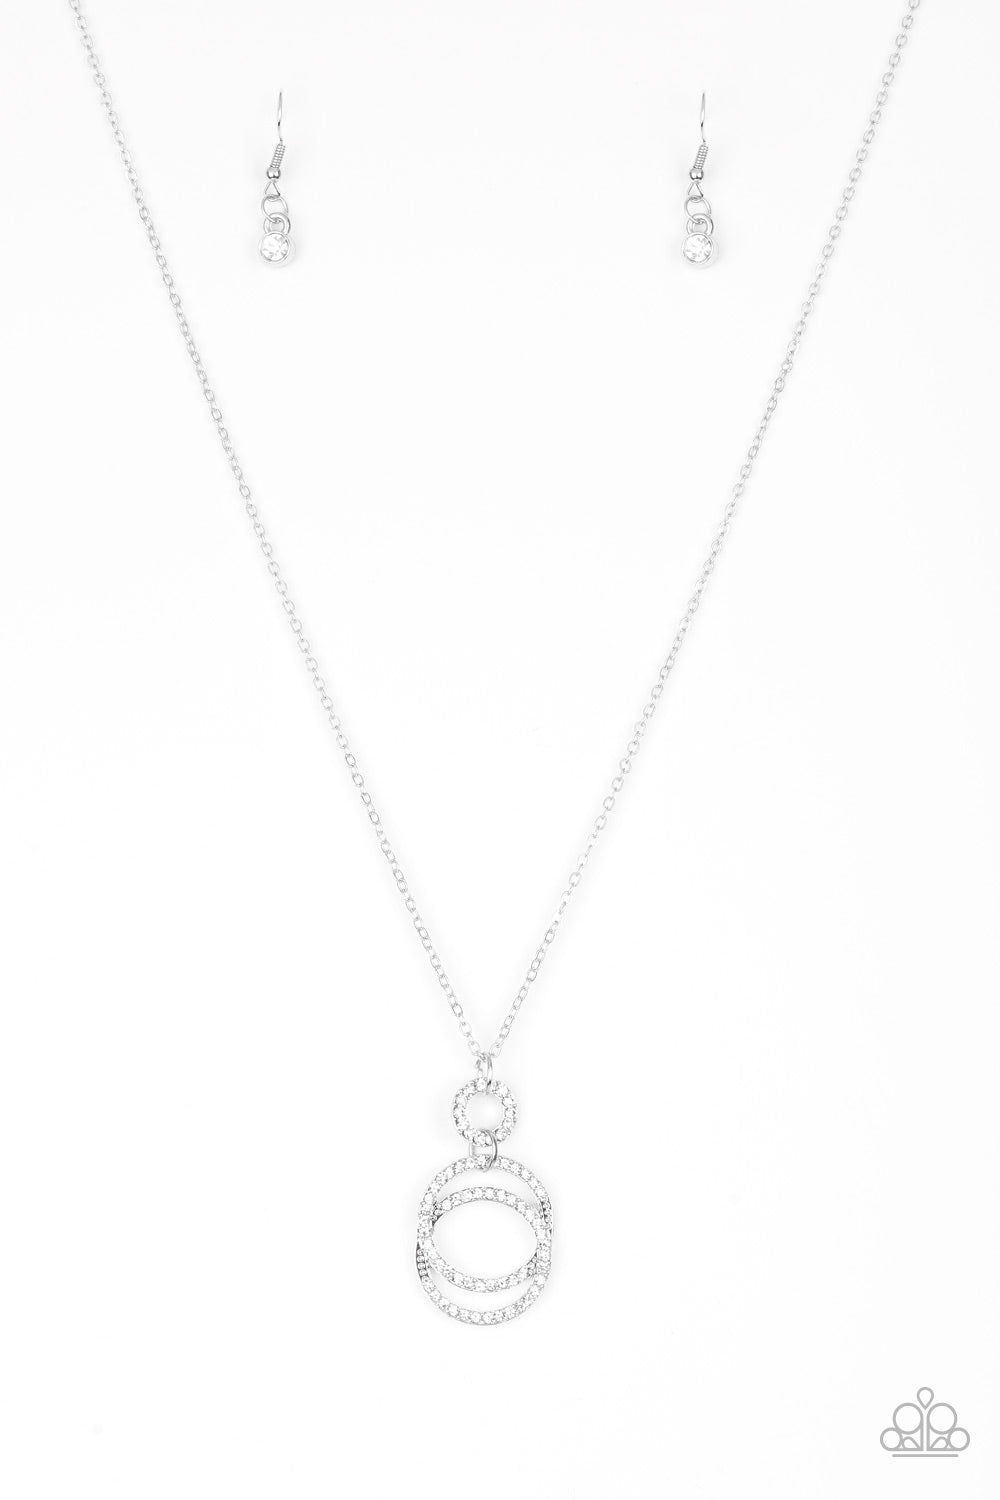 Encrusted in radiant white rhinestones, three silver hoops interlock at the bottom of an elongated silver chain for an elegant look. Features an adjustable clasp closure.